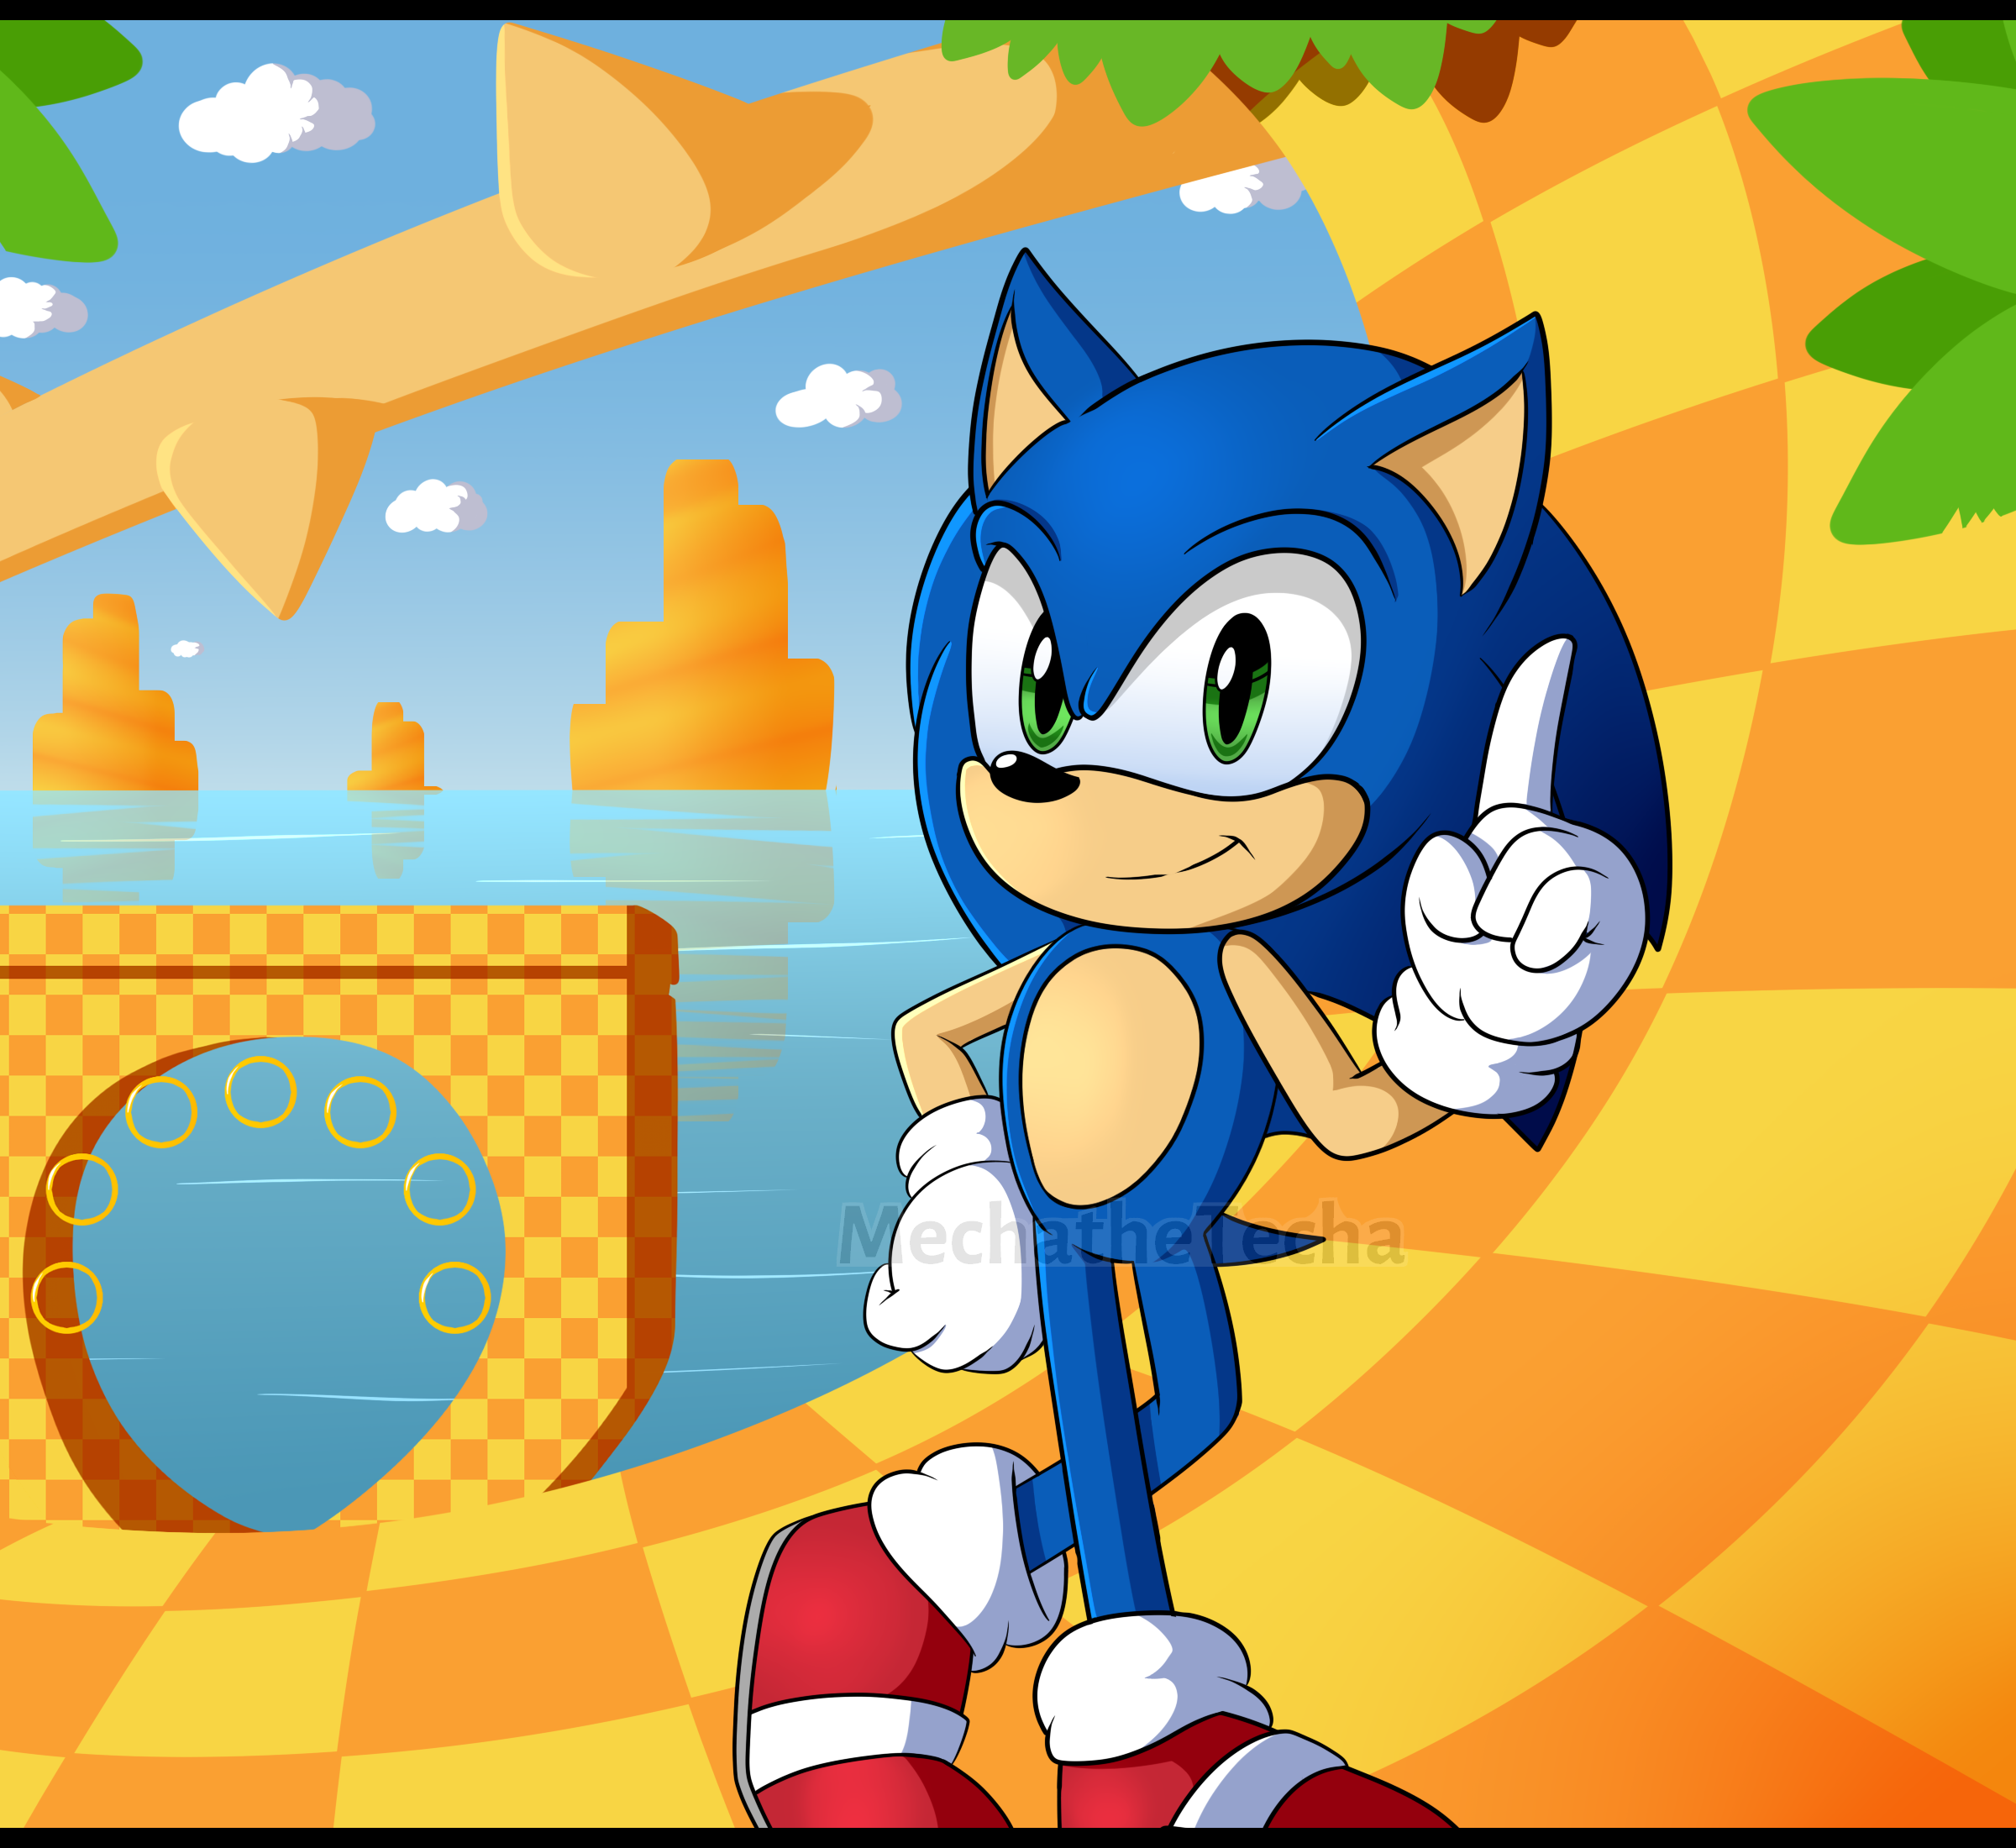 Classic Sonic Generations by Pho3nixSFM on DeviantArt  Sonic birthday  parties, Sonic birthday, Classic sonic